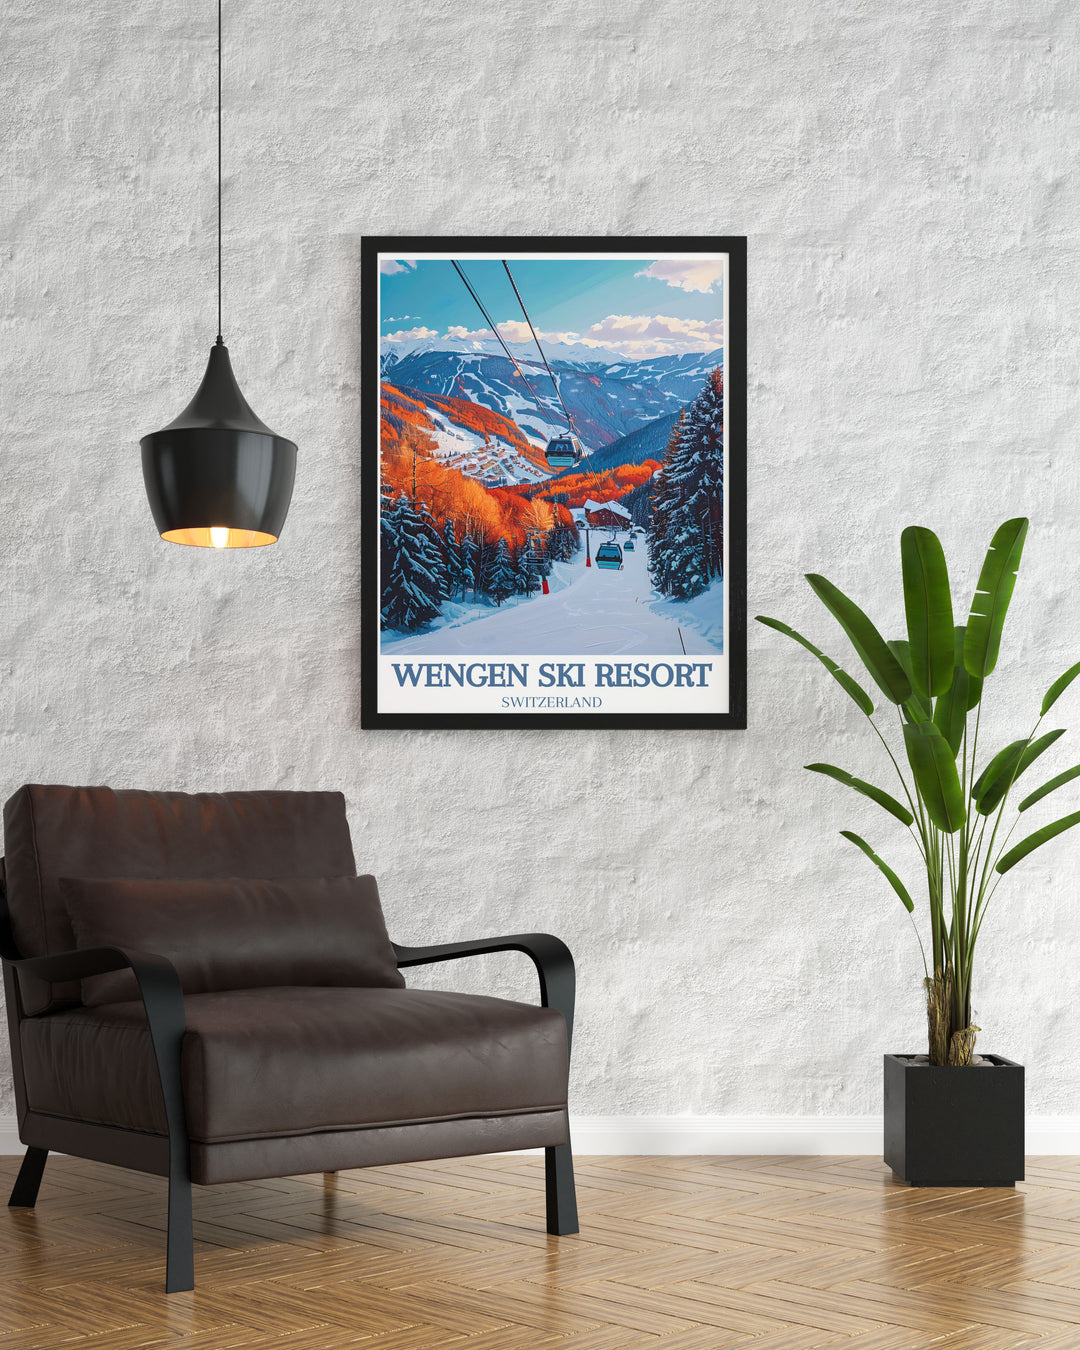 Fine art print of Wengen Ski Resort, showcasing the resorts majestic mountains and snow covered trails. A beautiful piece that brings the beauty of Switzerlands alpine landscapes into your home decor, perfect for nature lovers.